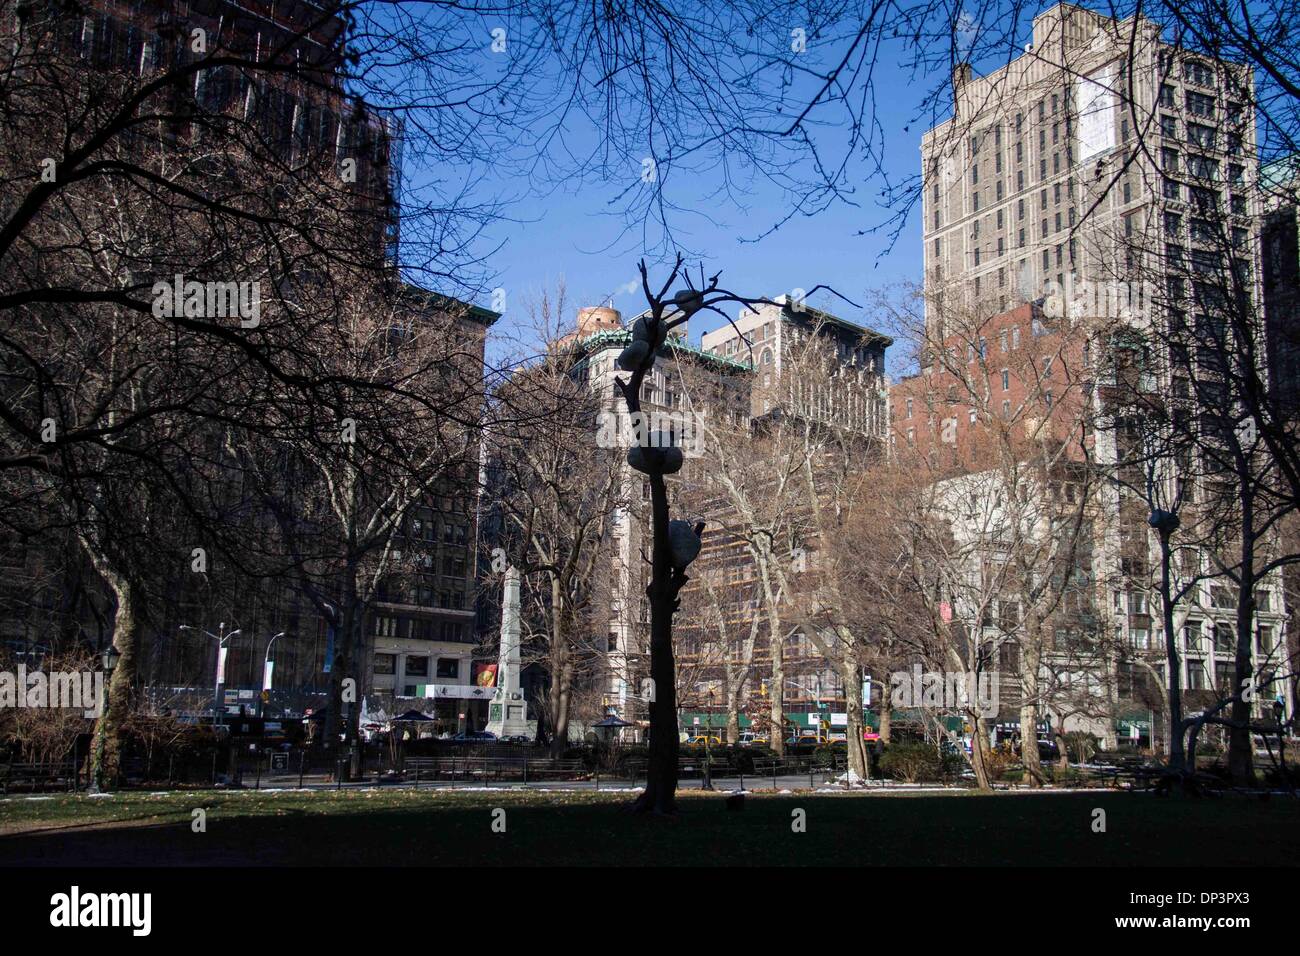 New York, Madison Square Park in New York. 7th Jan, 2014. A picture of one of the three bronze trees (with stones atop the arboreal branches) of Italian artist Giuseppe Penone's 'Ideas of Stone' installation, at Madison Square Park in New York, on Jan. 7, 2014. Penone, a member of the Italian Arte Povera movement, employs commonplace materials and natural forms in his exploration of the relationship between man and nature. © Niu Xiaolei/Xinhua/Alamy Live News Stock Photo